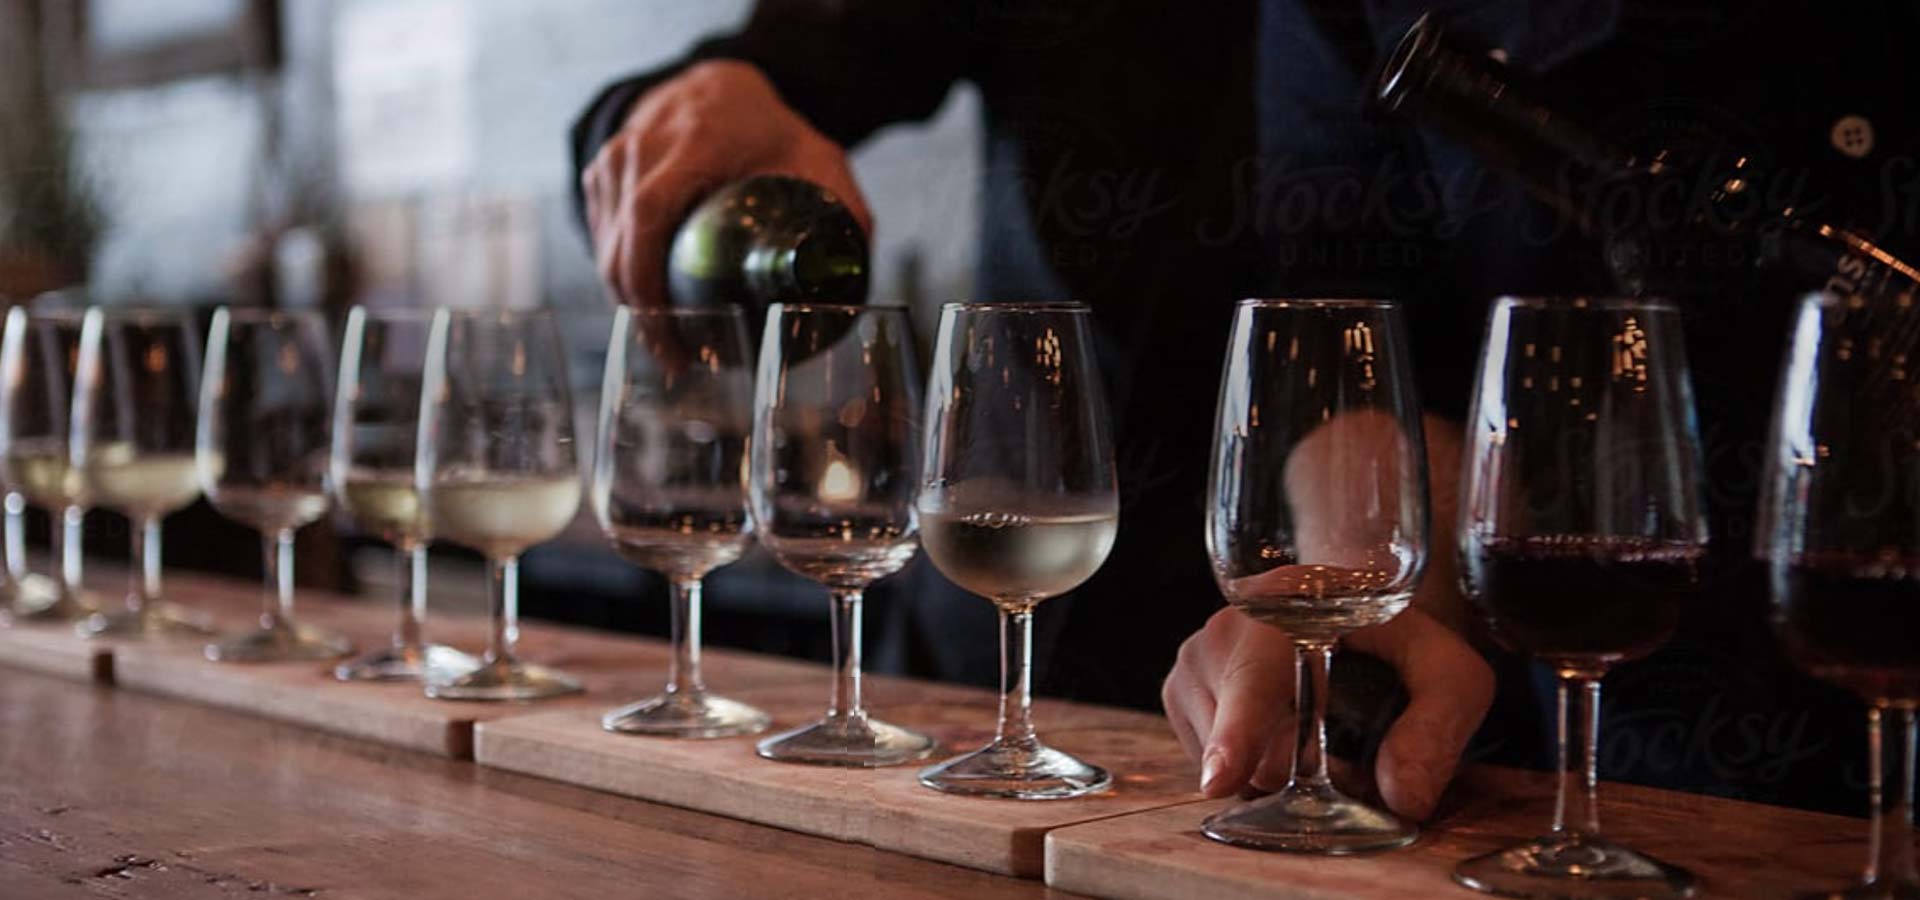 Close up of server pouring glasses of wine in a row.